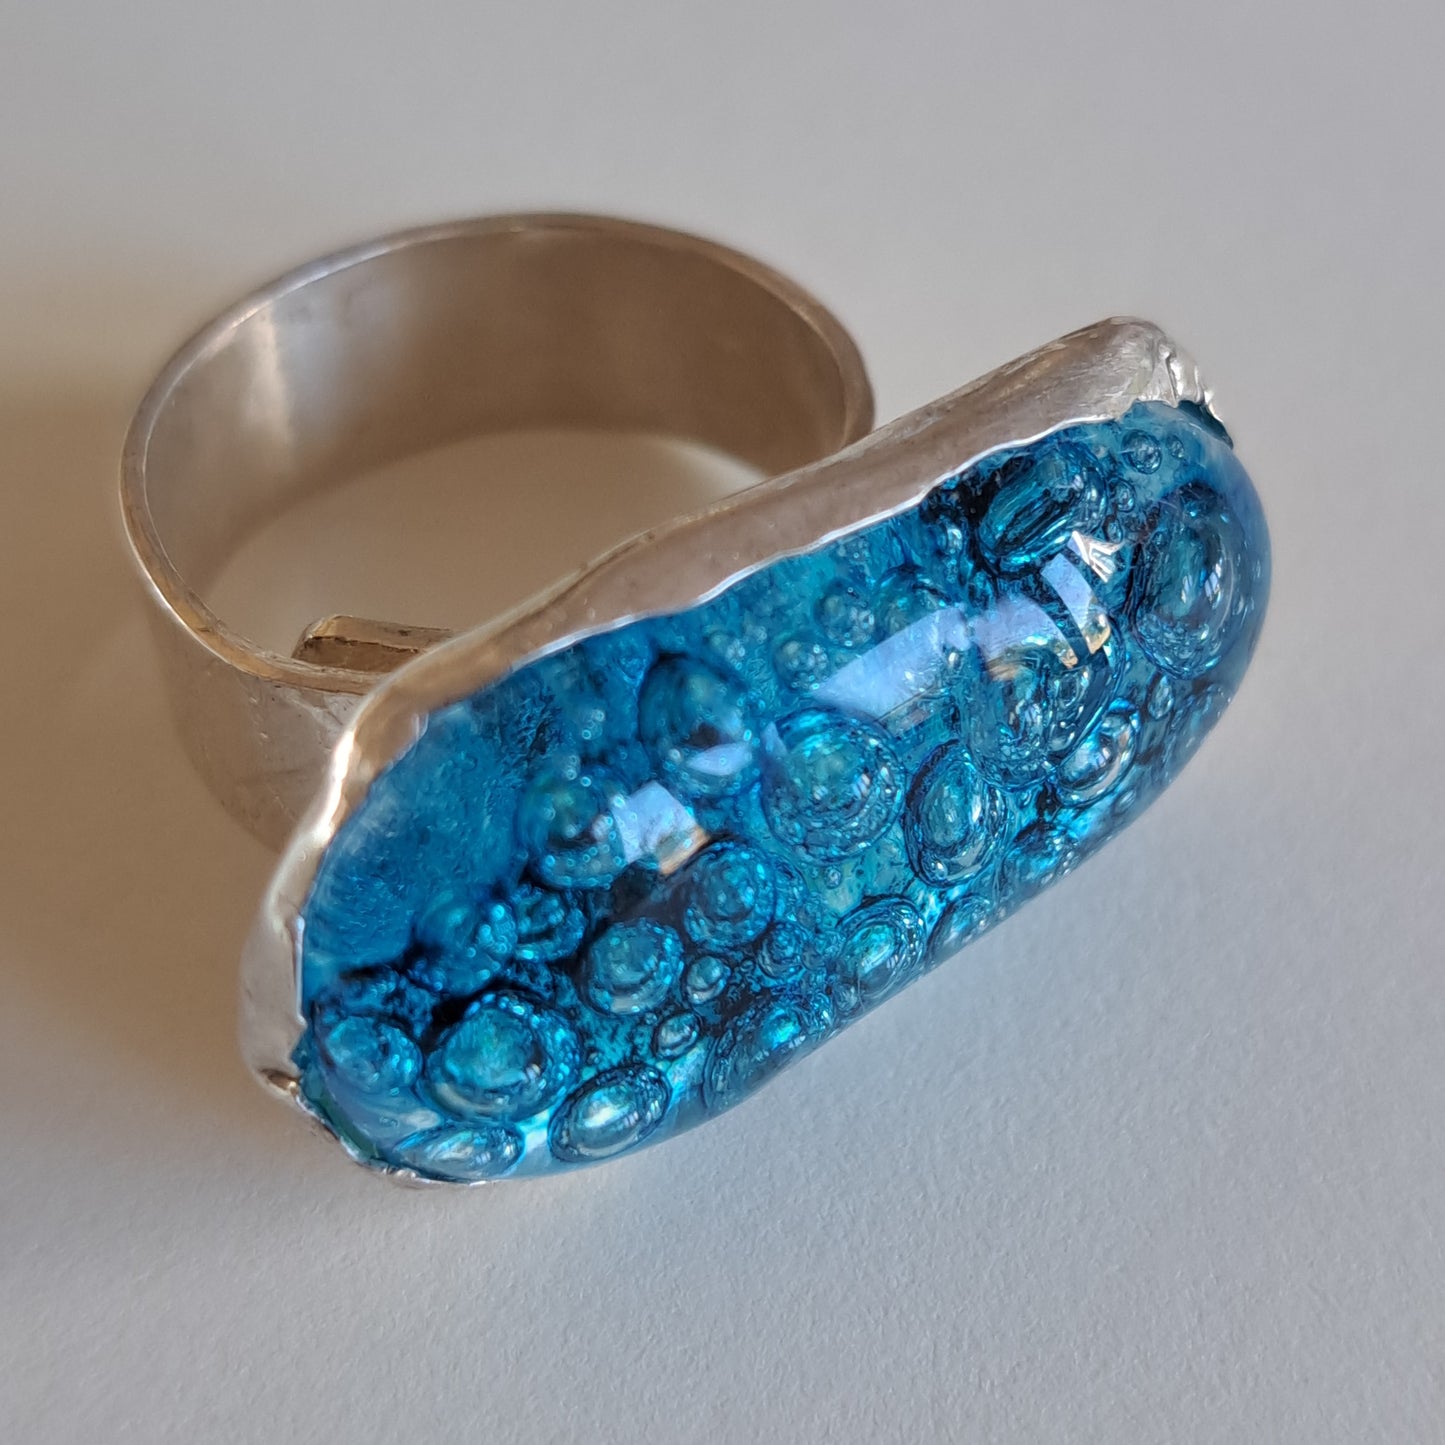 Turqoise blue bubble glass and silver ring